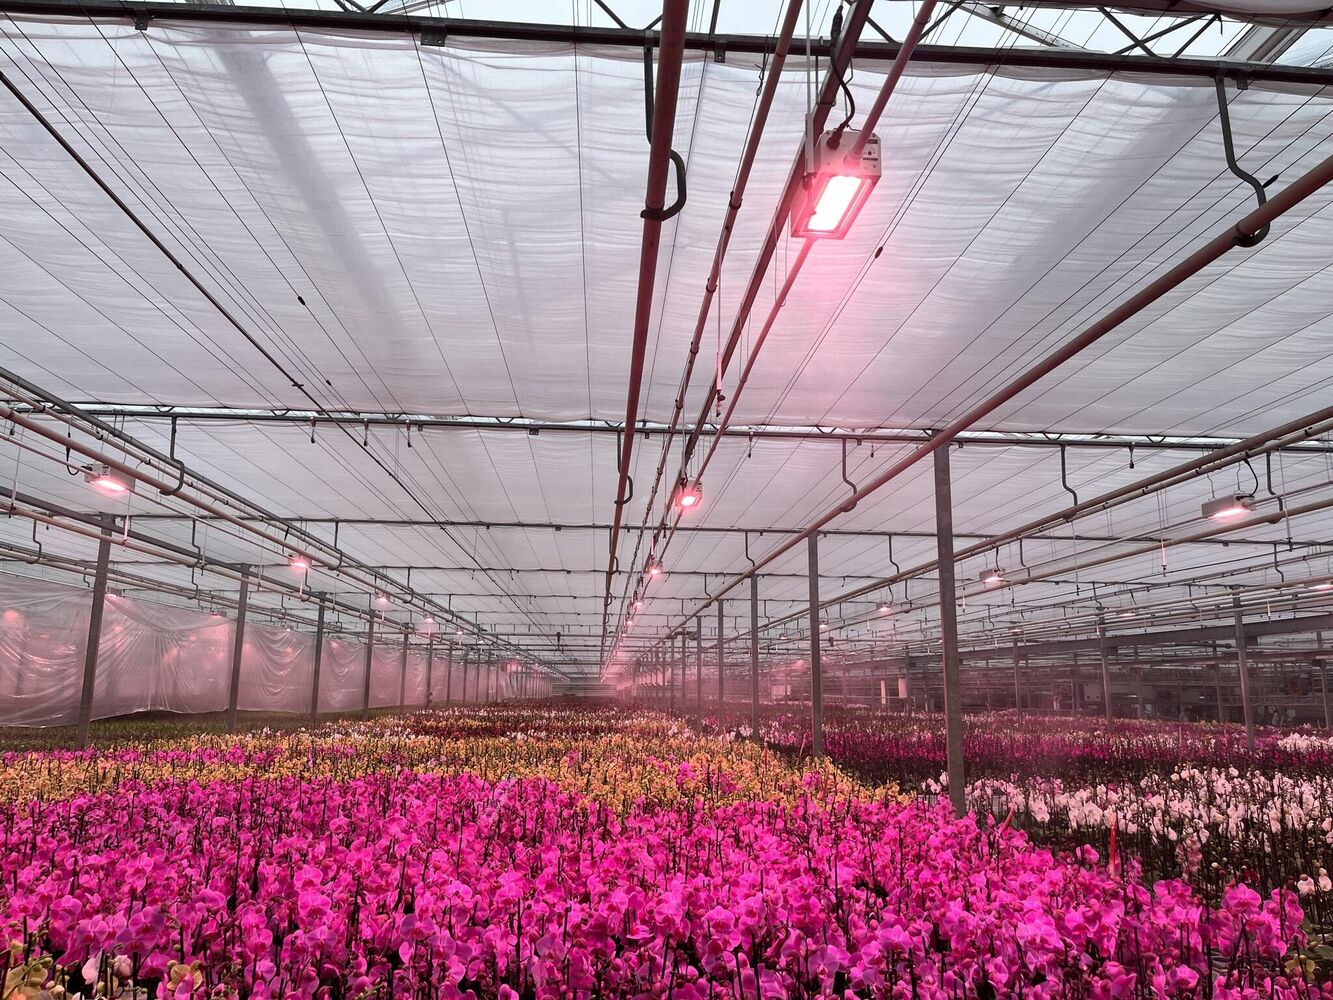 Floral Daily: Dimmable LED lights save phaleanopsis grower lots on energy costs